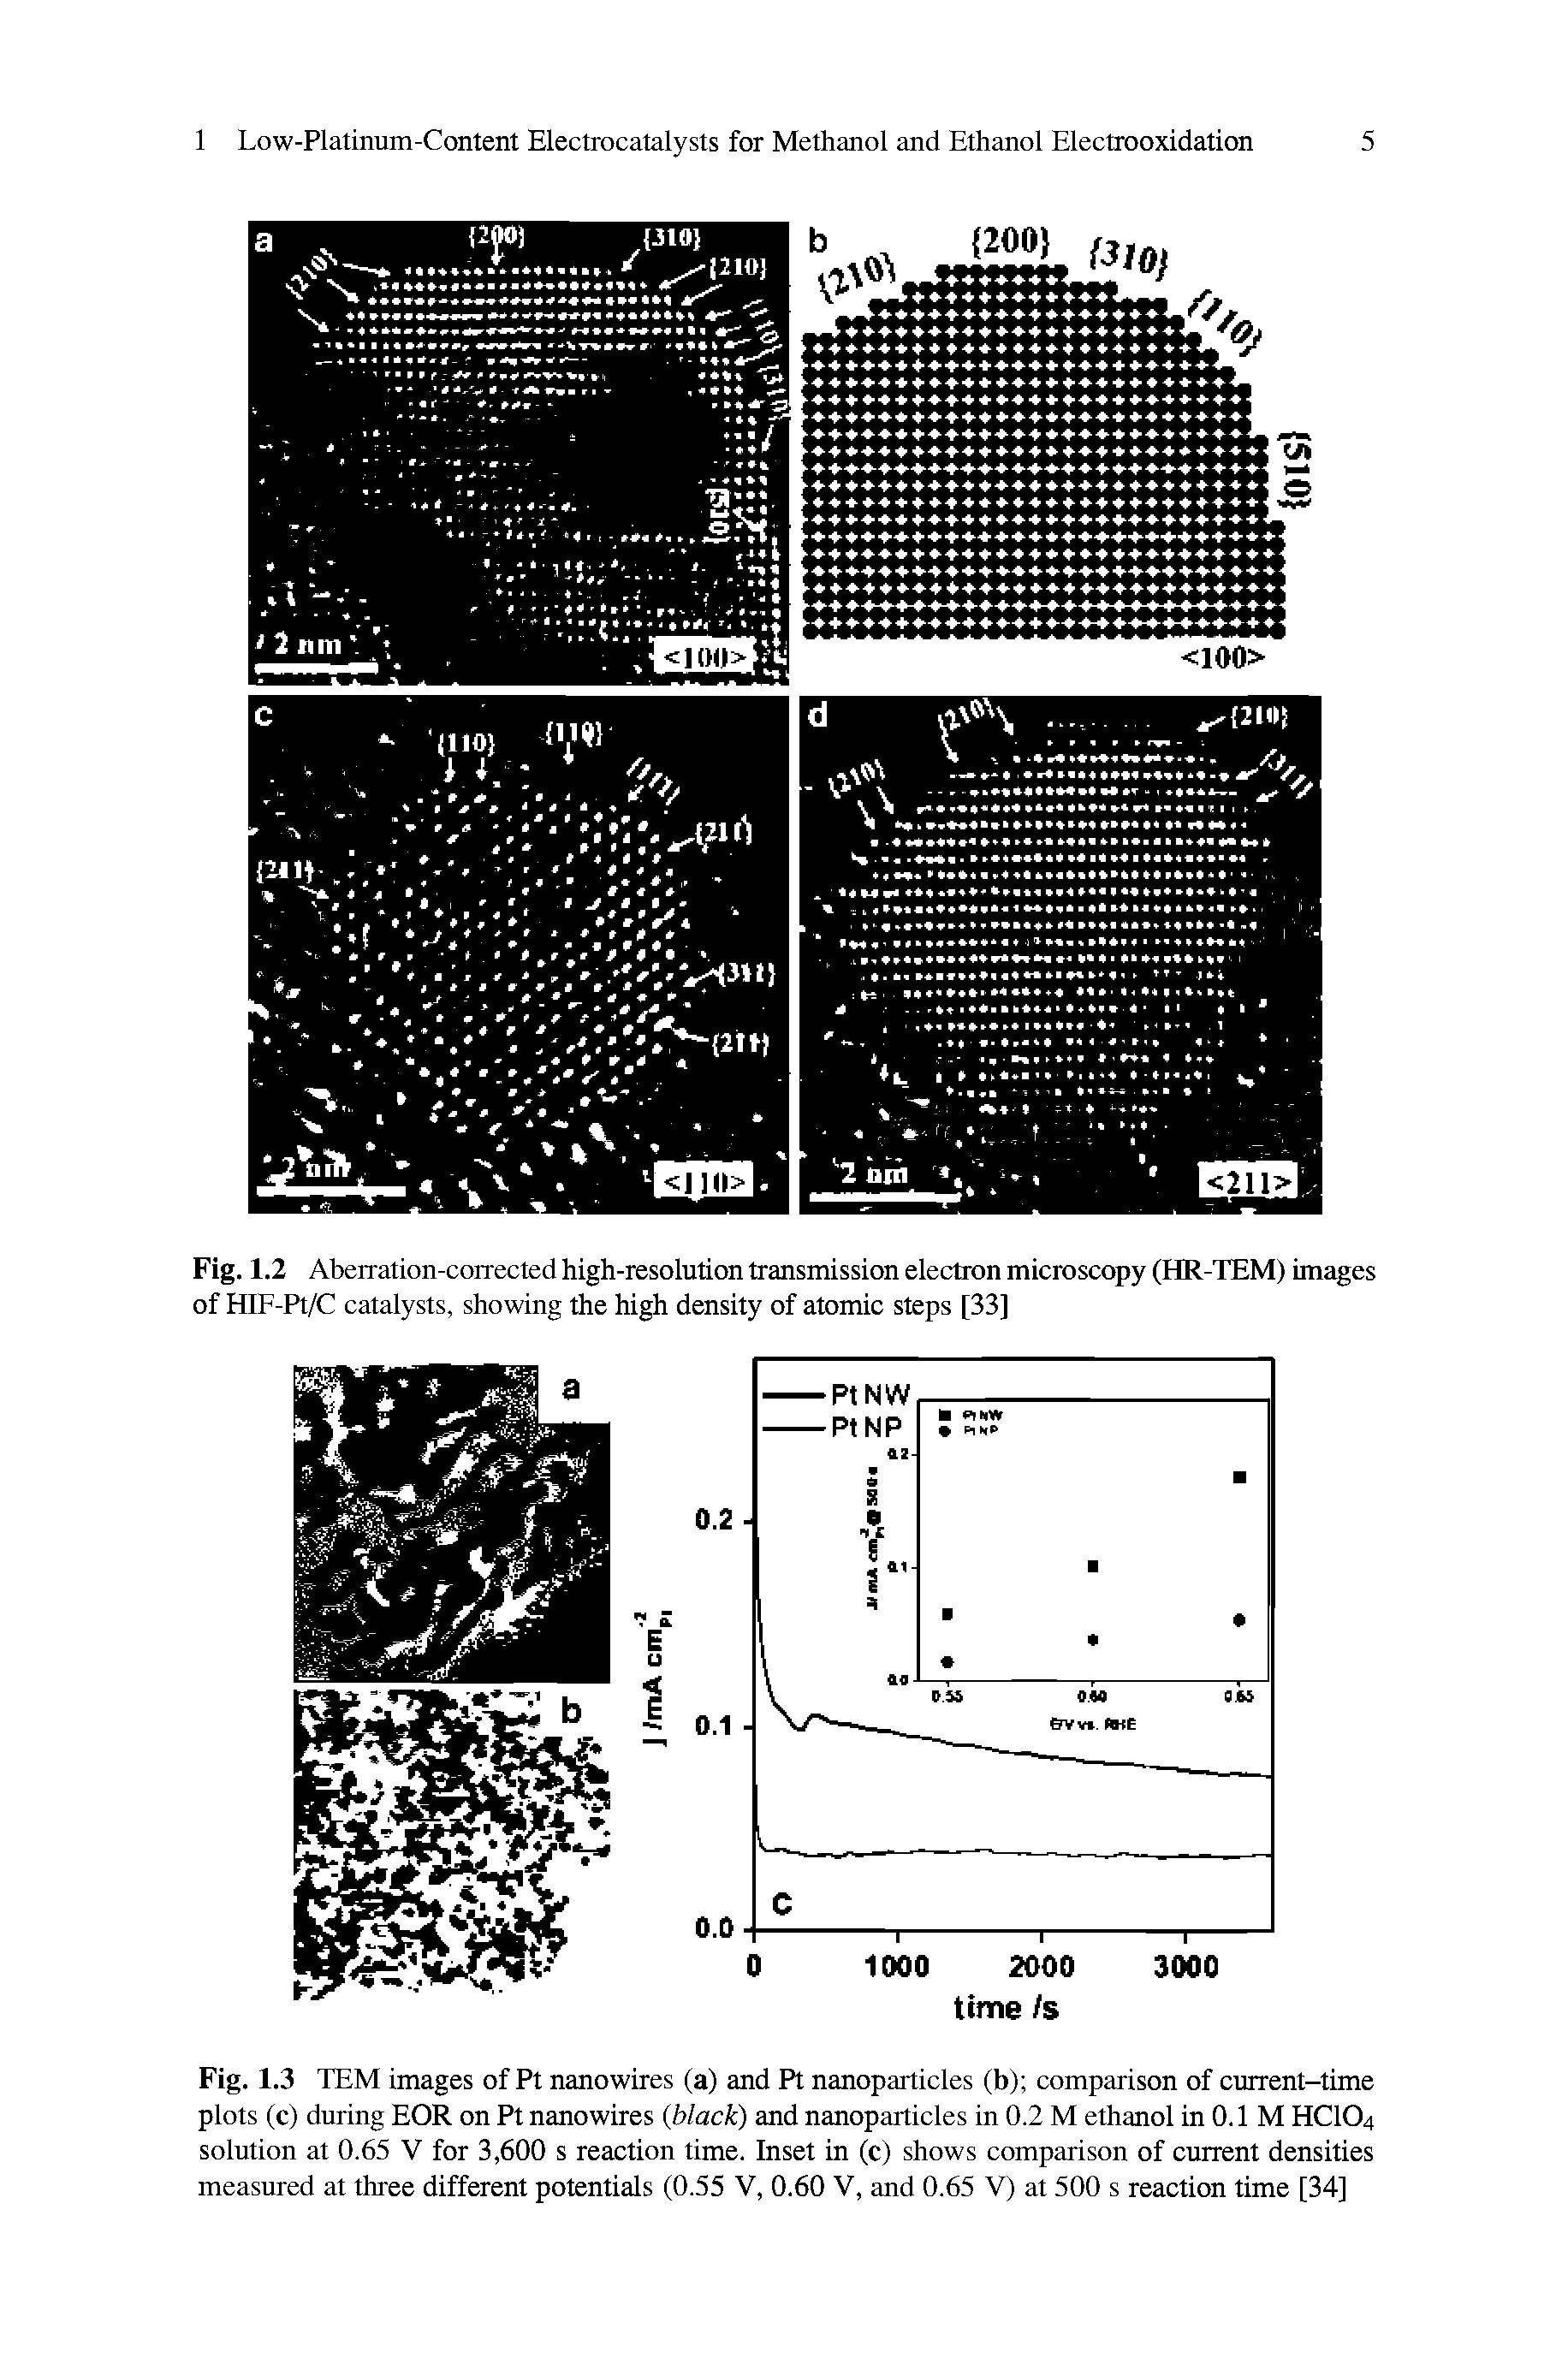 Fig. 1.2 Aberration-corrected high-resolution transmission electron microscopy (HR-TEM) images of HIF-Pt/C catalysts, showing the high density of atomic steps [33]...